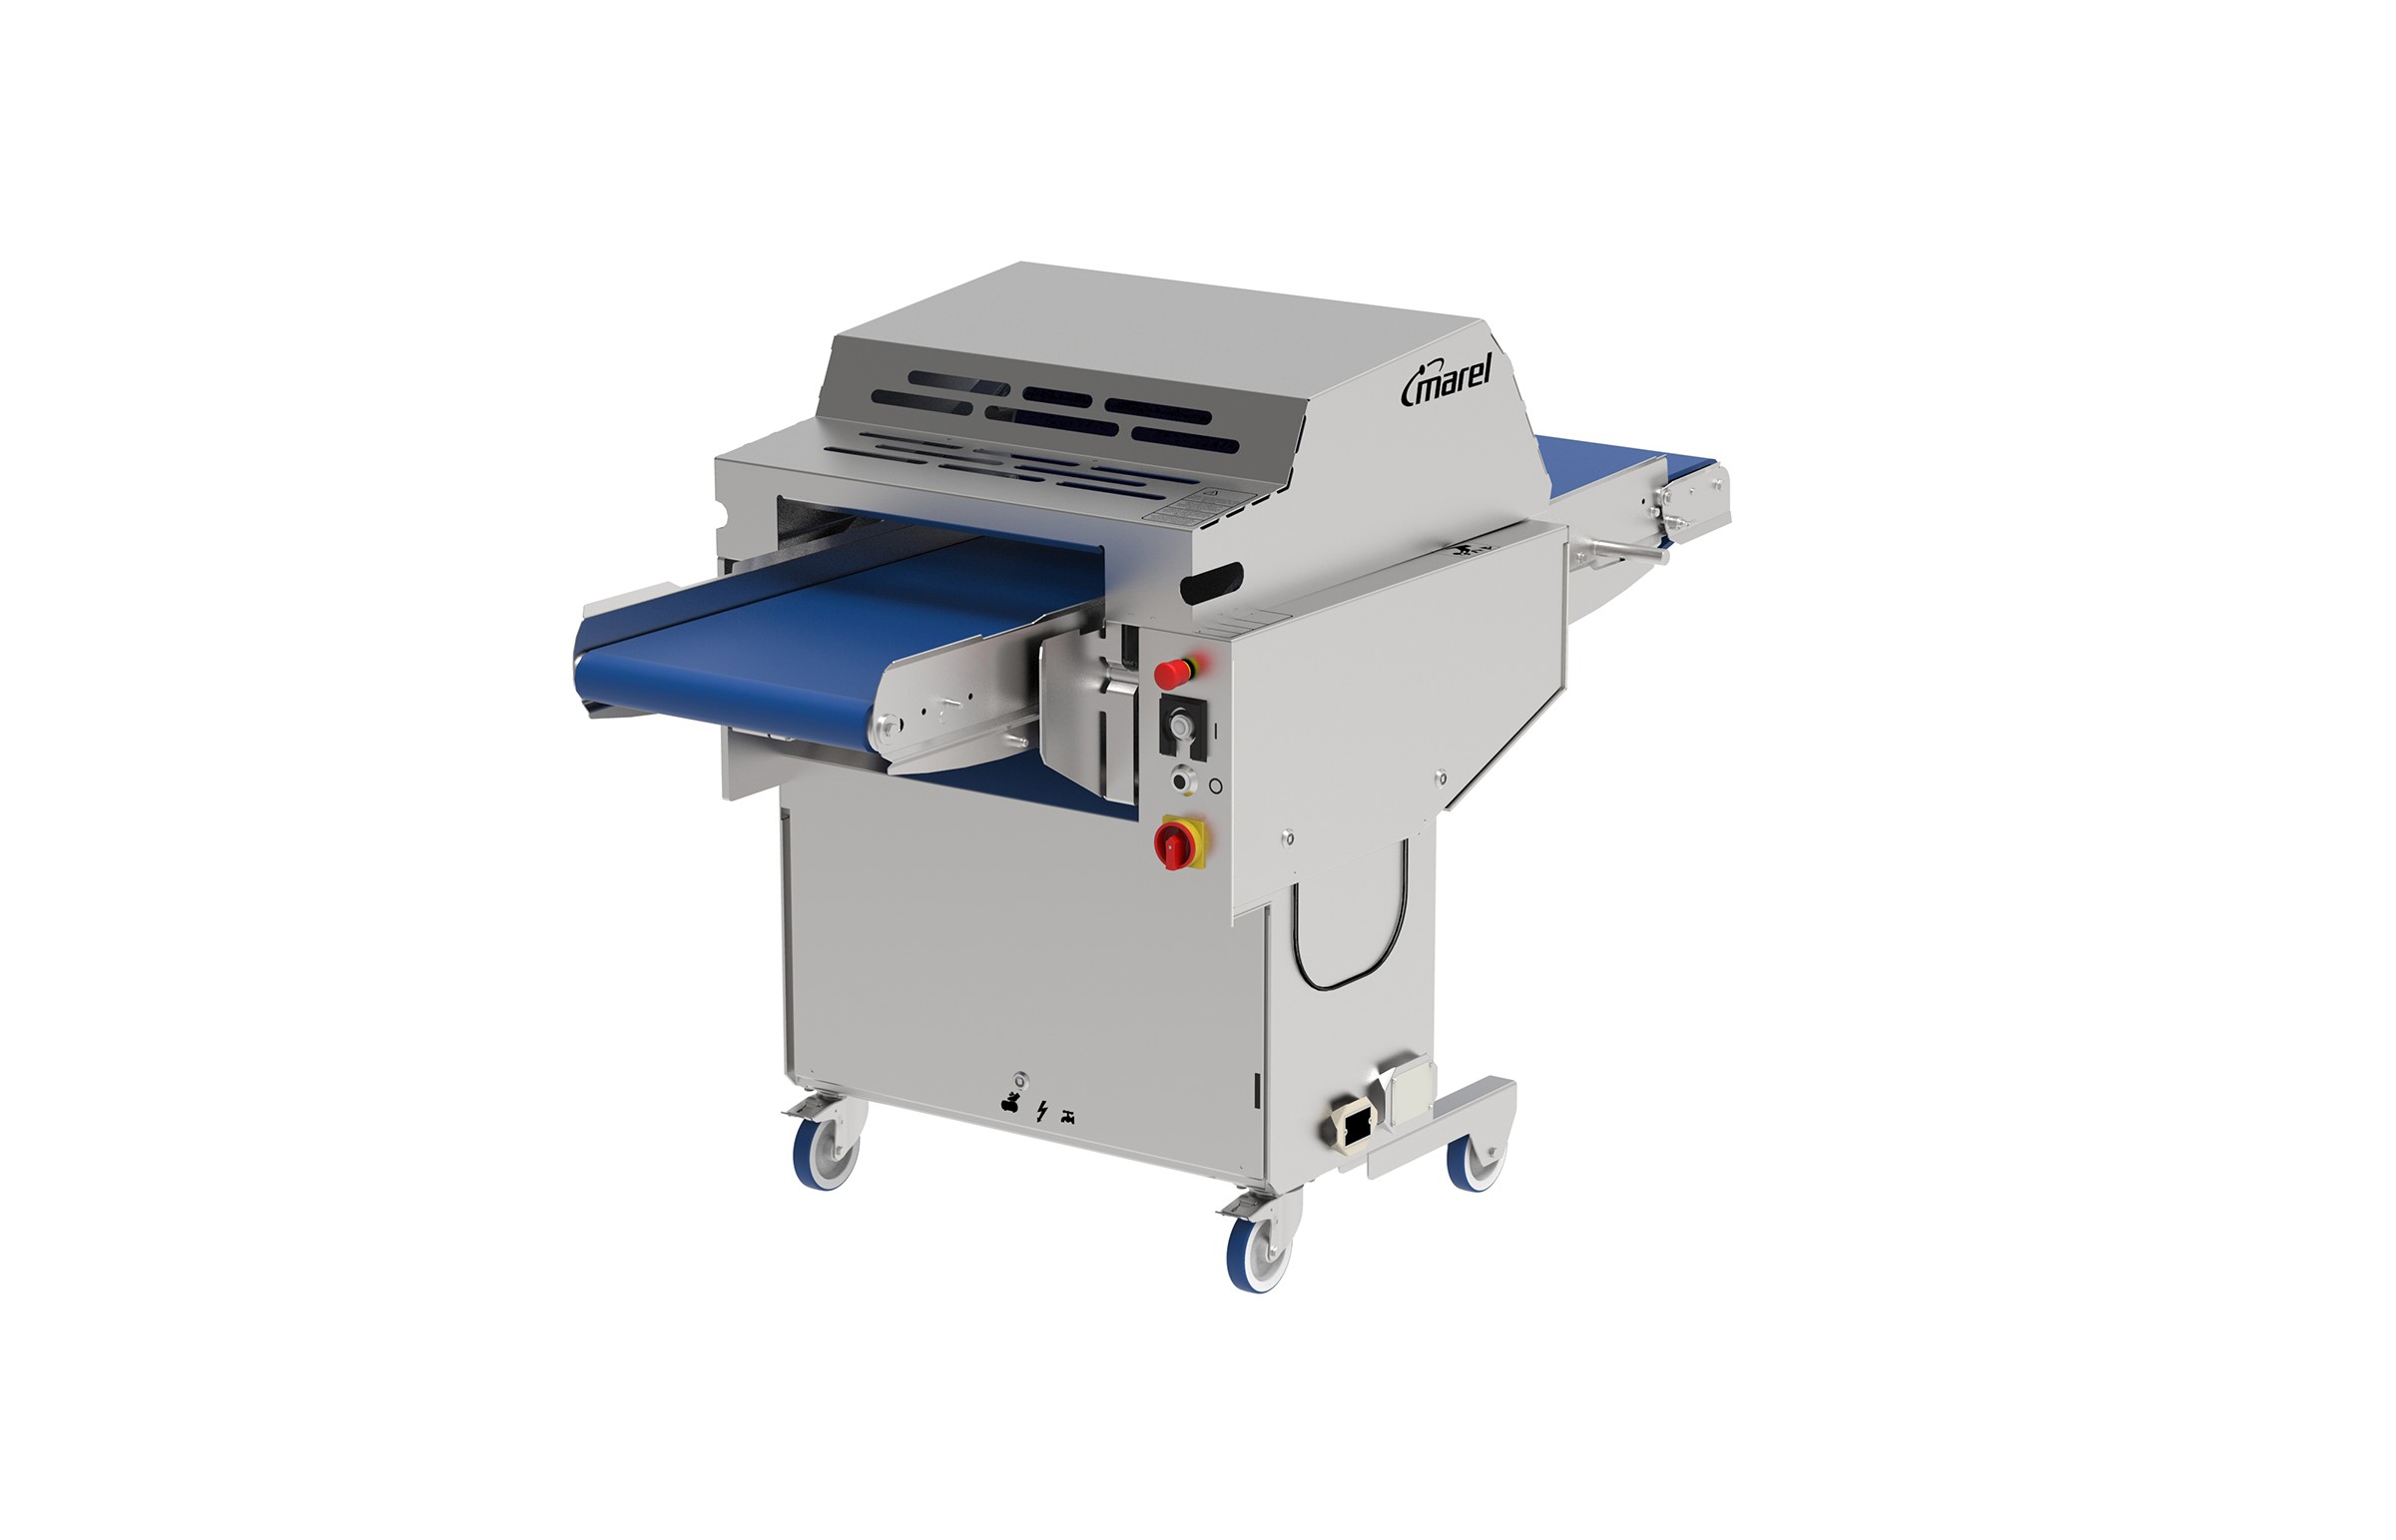 Townsend SK 14 410 membrane and poultry skinner